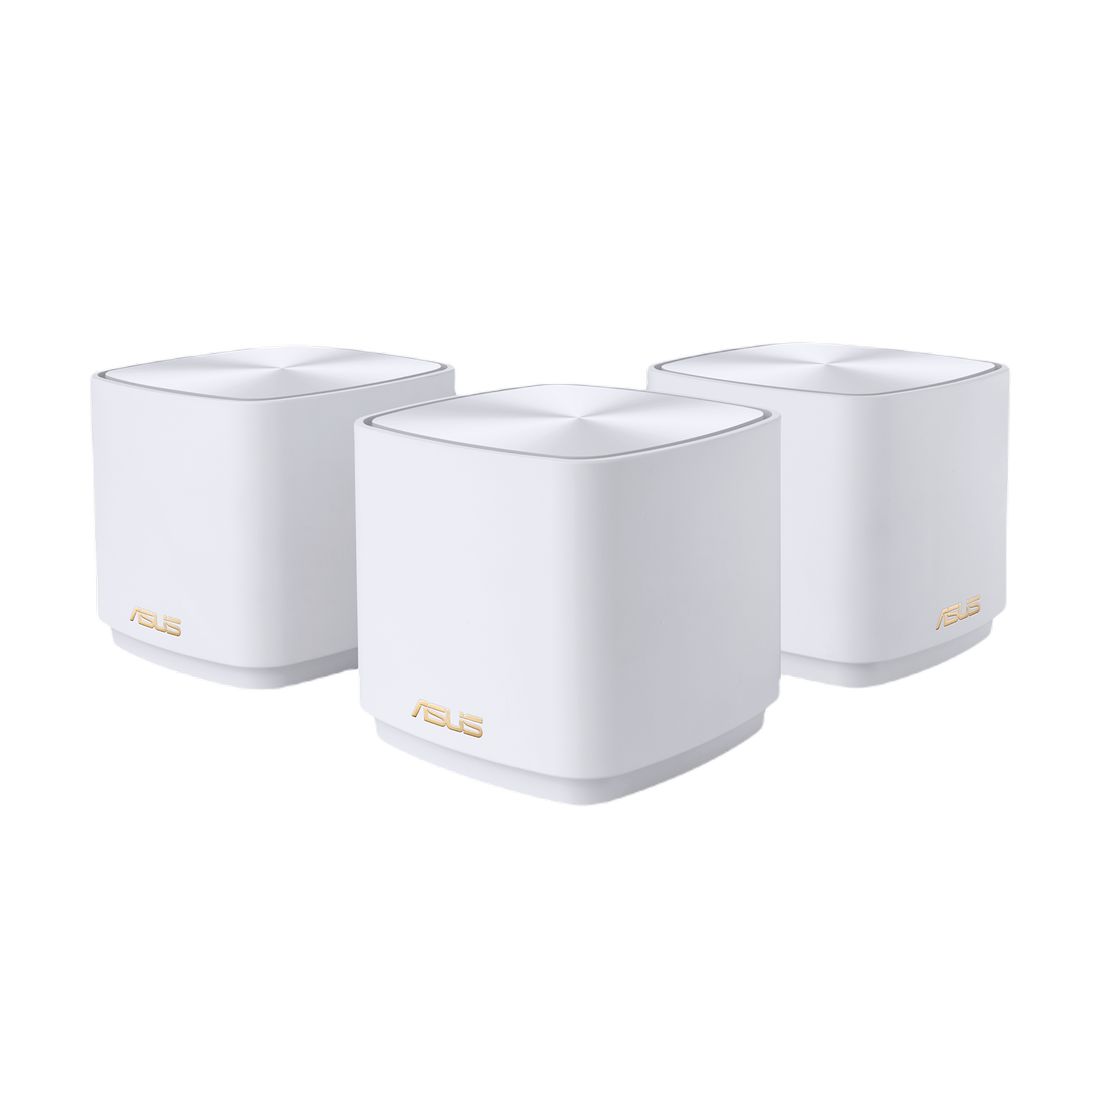 Asus ZenWiFi XD5 AX3000 WiFi 6 Router - White (Pack of 3)